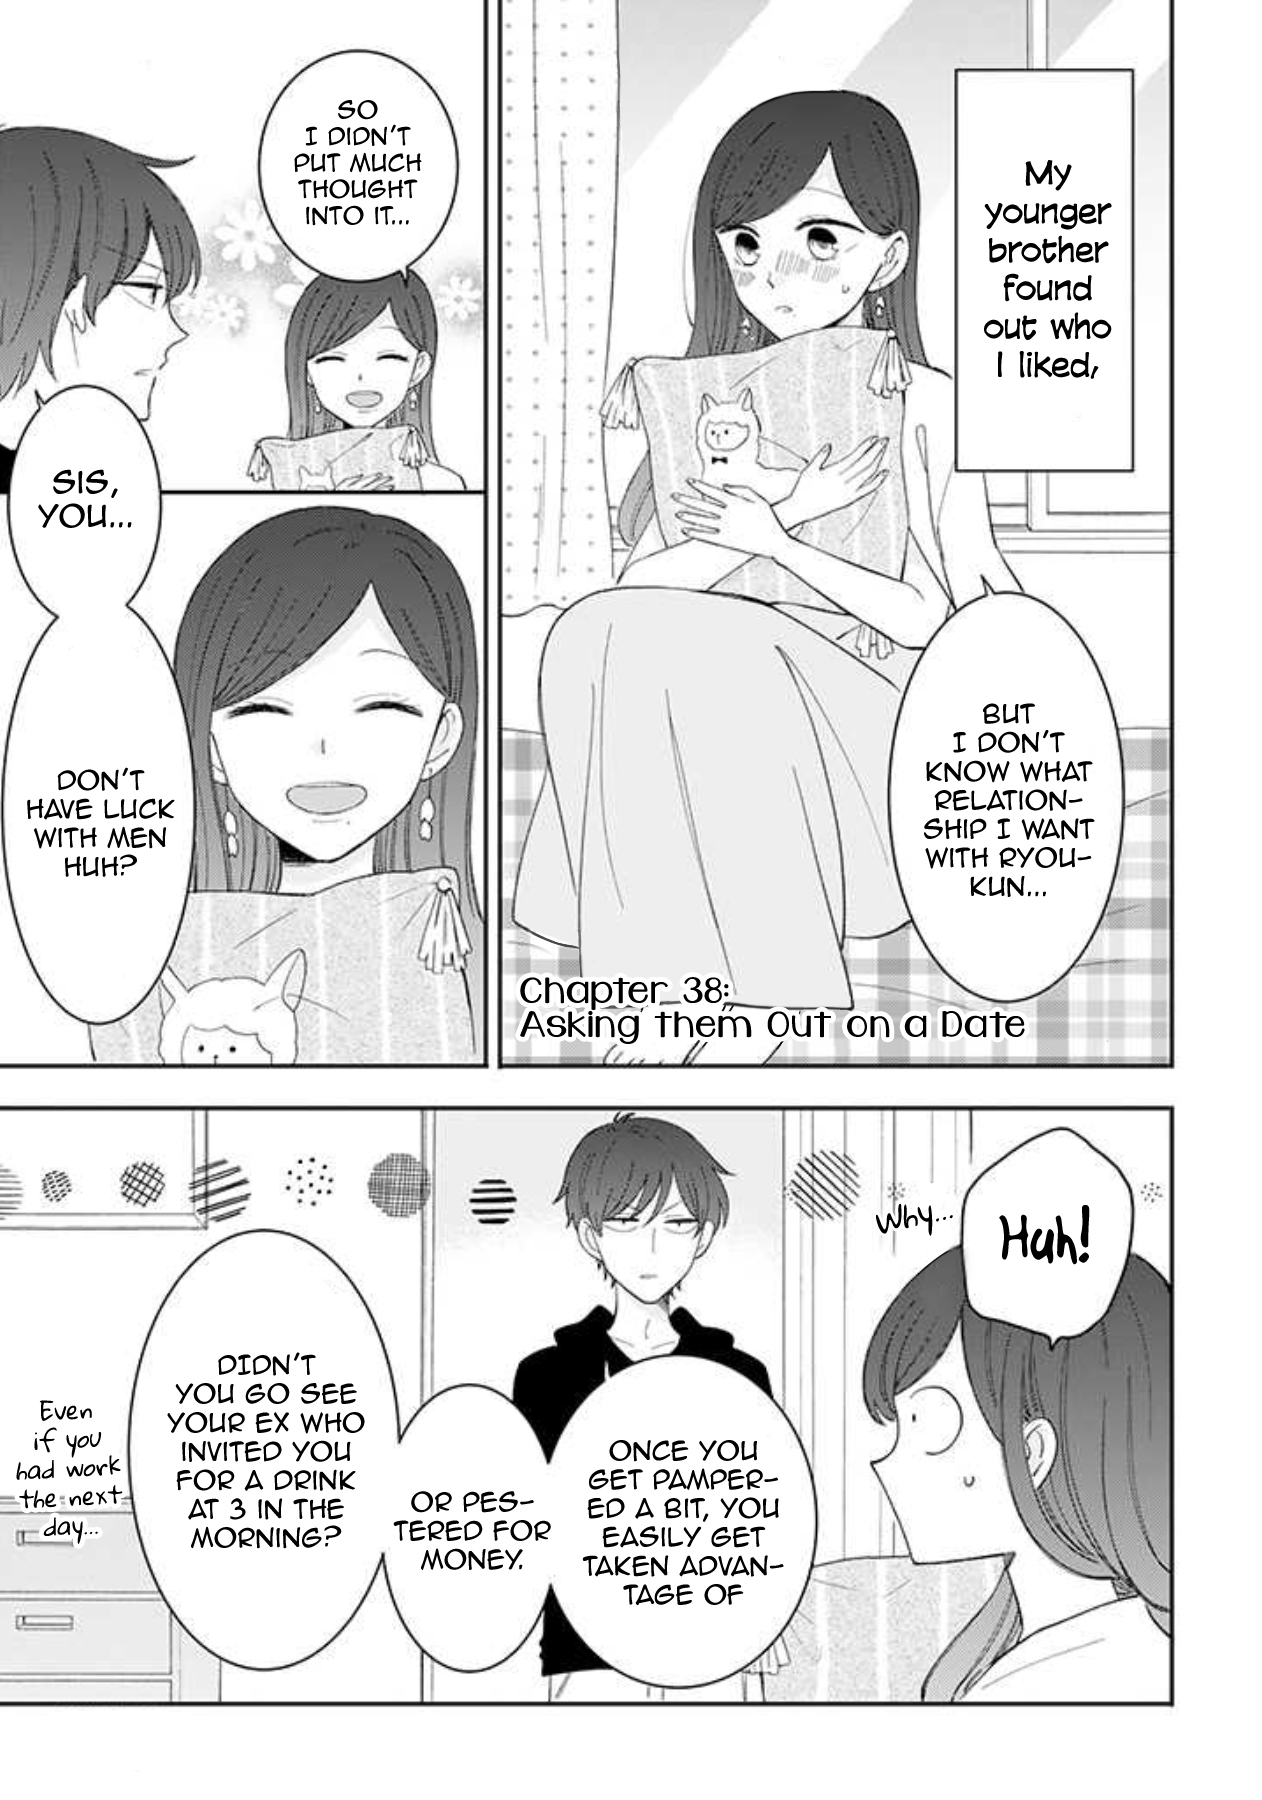 Tsun Ama na Kareshi Ch. 38 Asking them Out on a Date